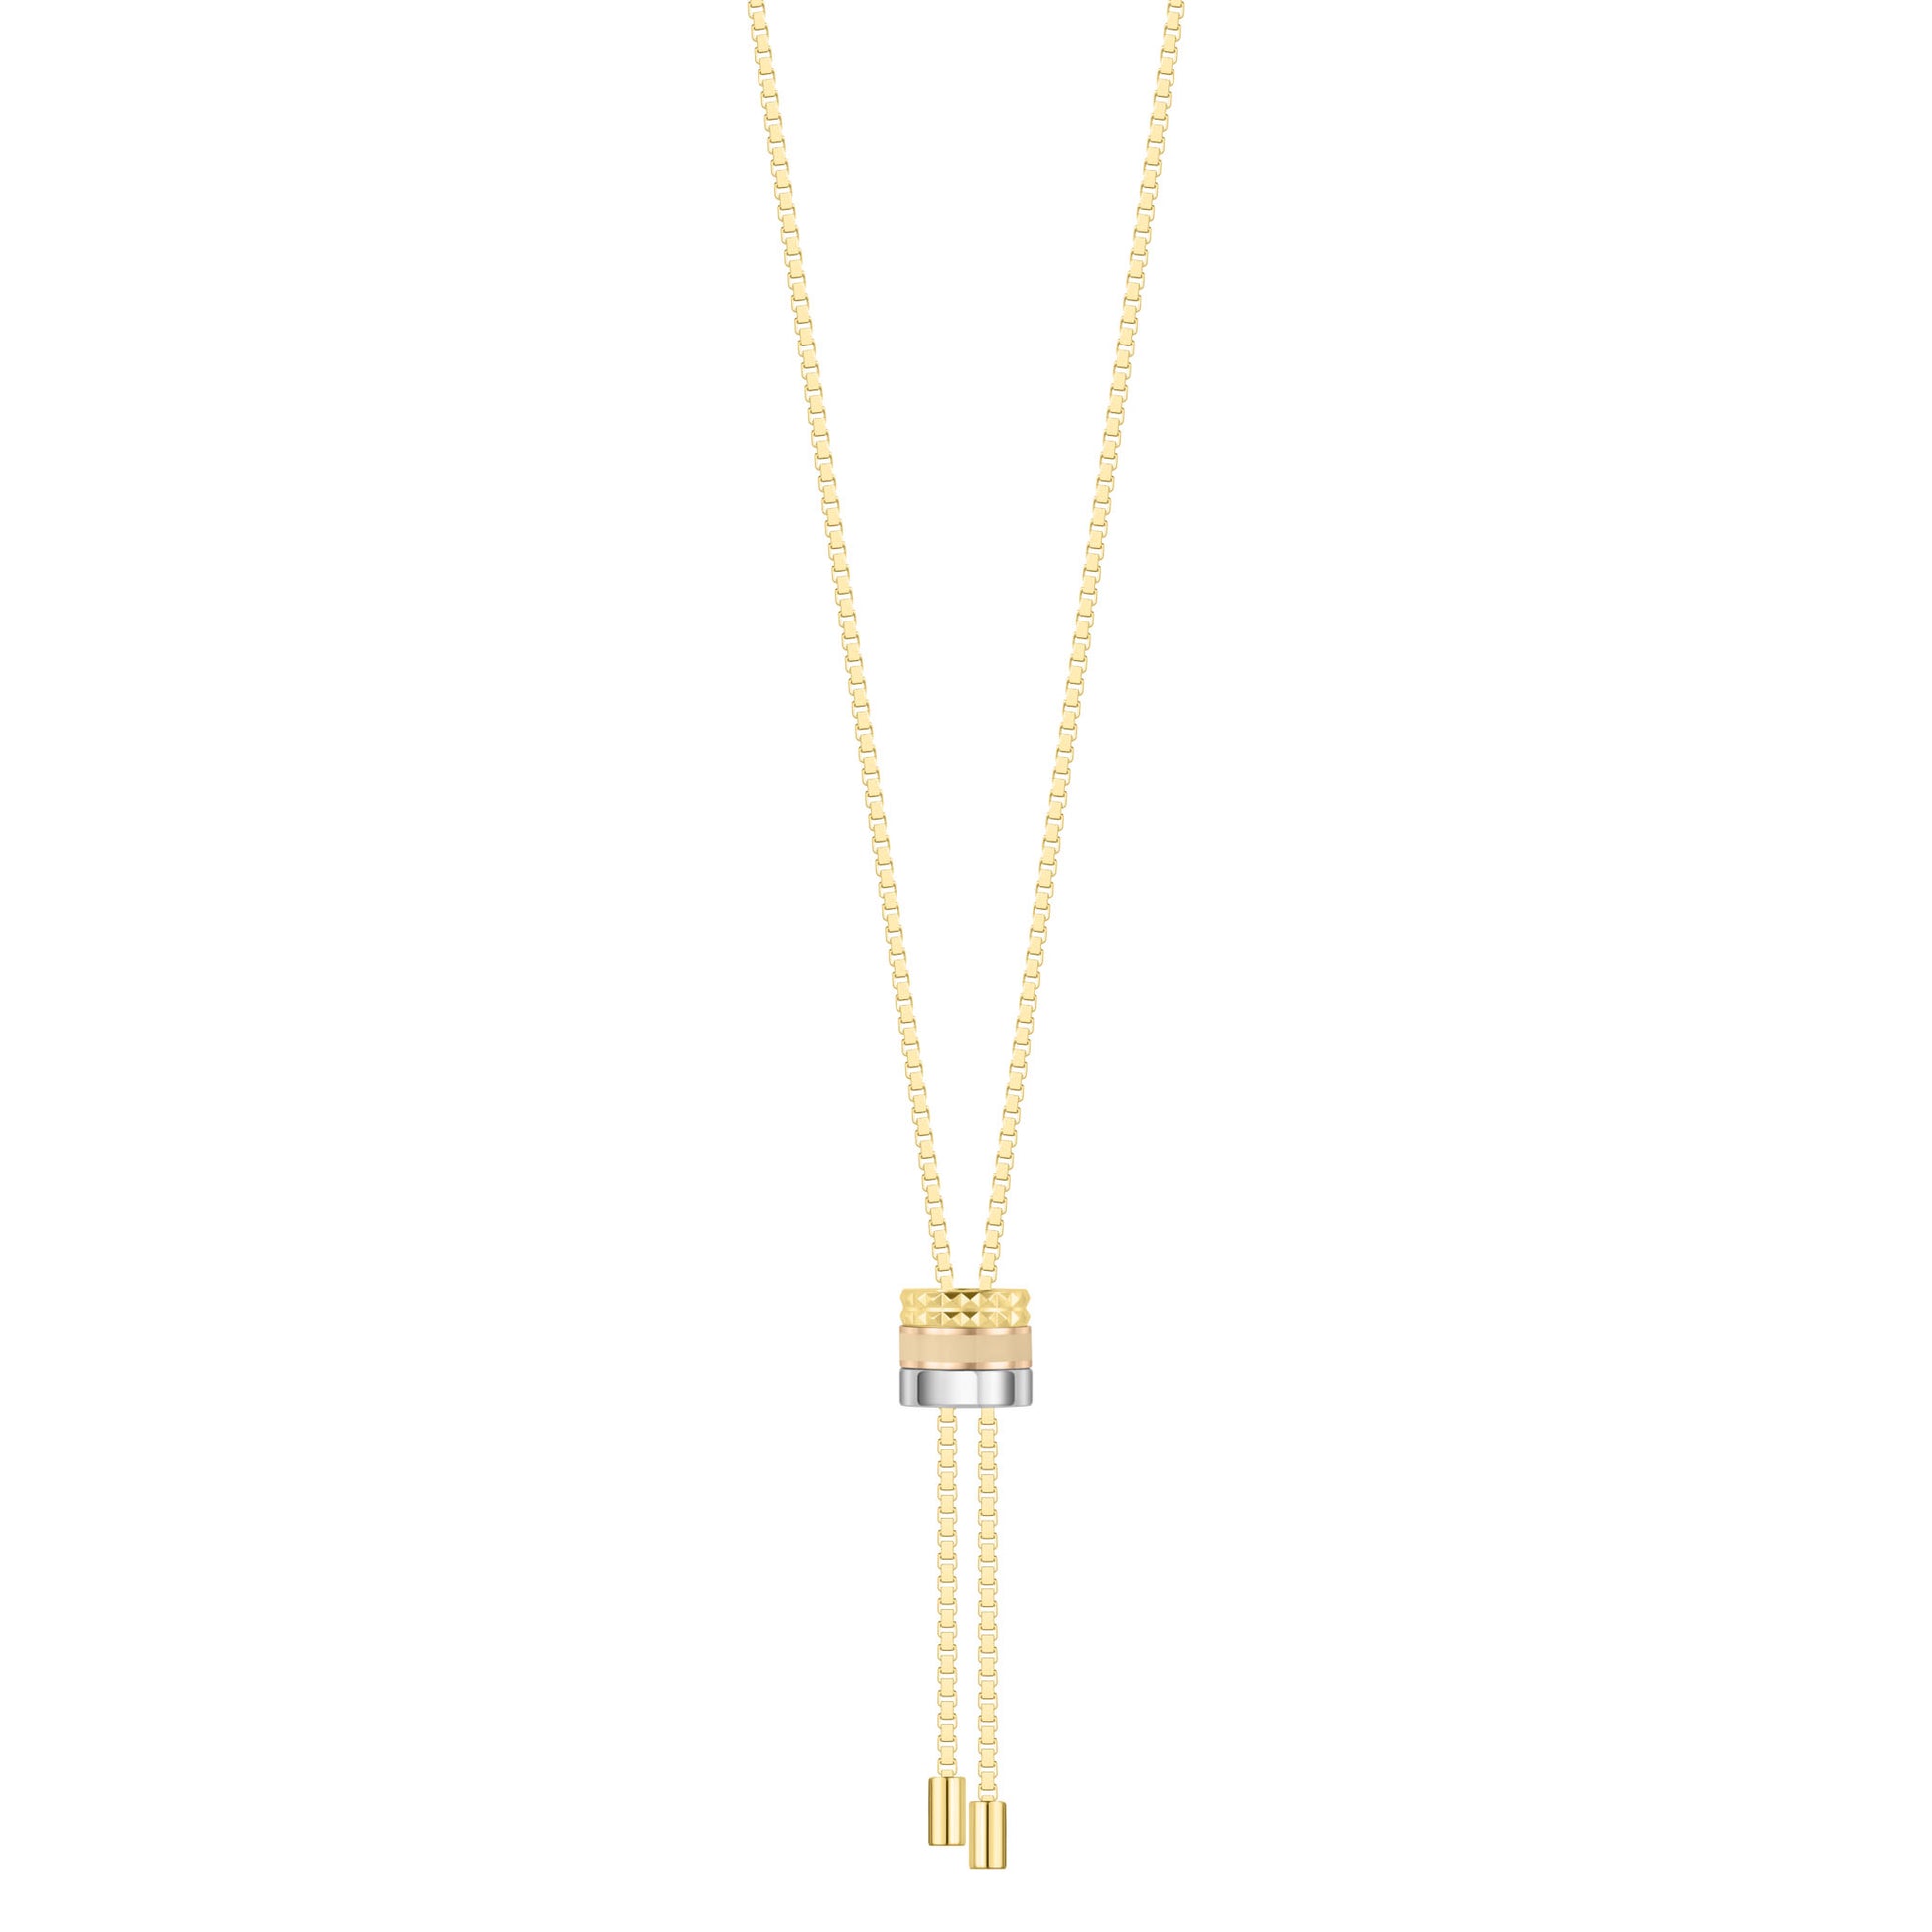 WEWA BOLO TIE TUBE BEIGE CHIP NECKLACE